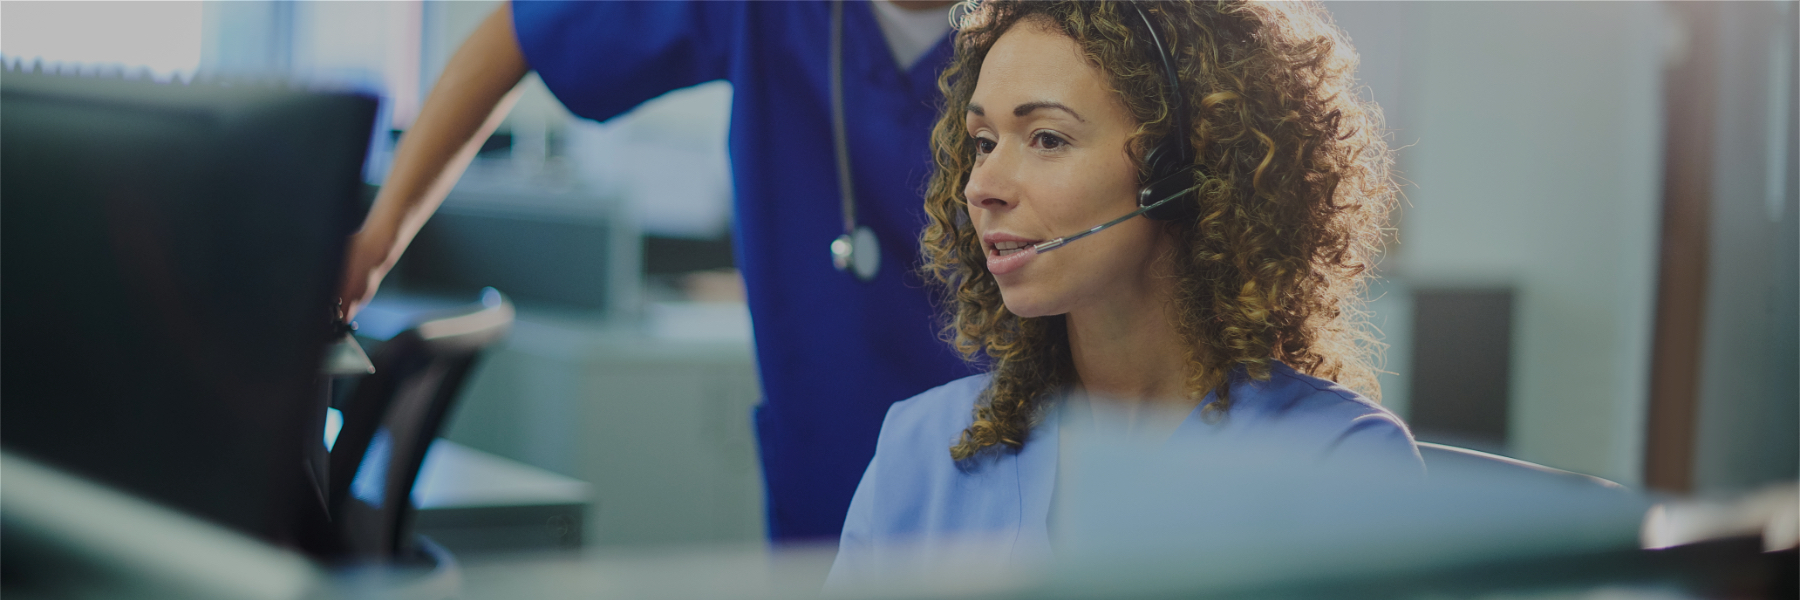 Image of a nurse with headset sitting in front of a computer, and speaking to another nurse standing next to her